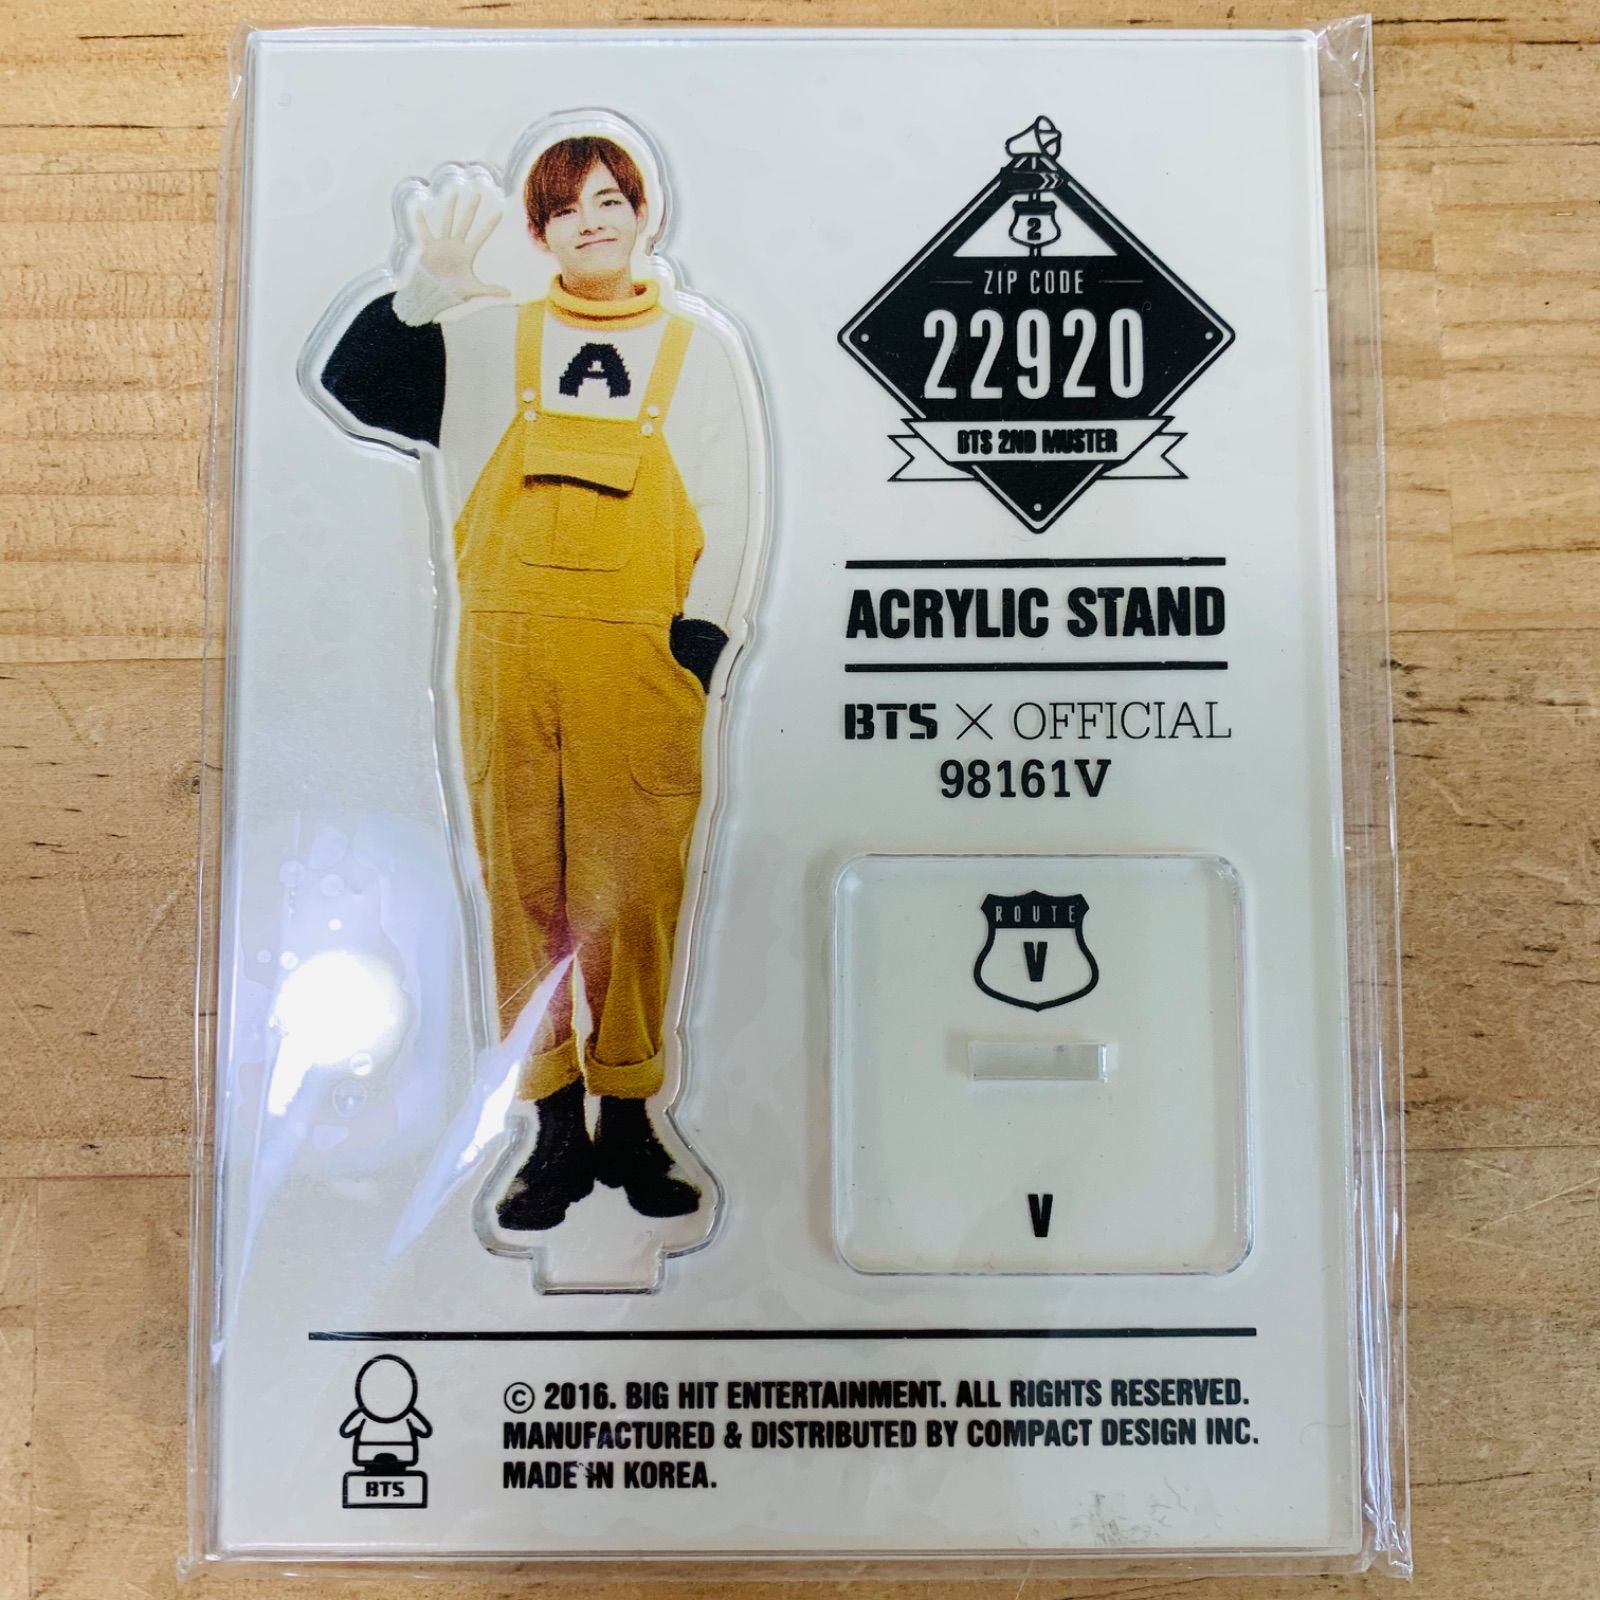 ☆T34653-20 BTS V テヒョン BTS 2ND MUSTER ZIP CODE：22920 アクリル 